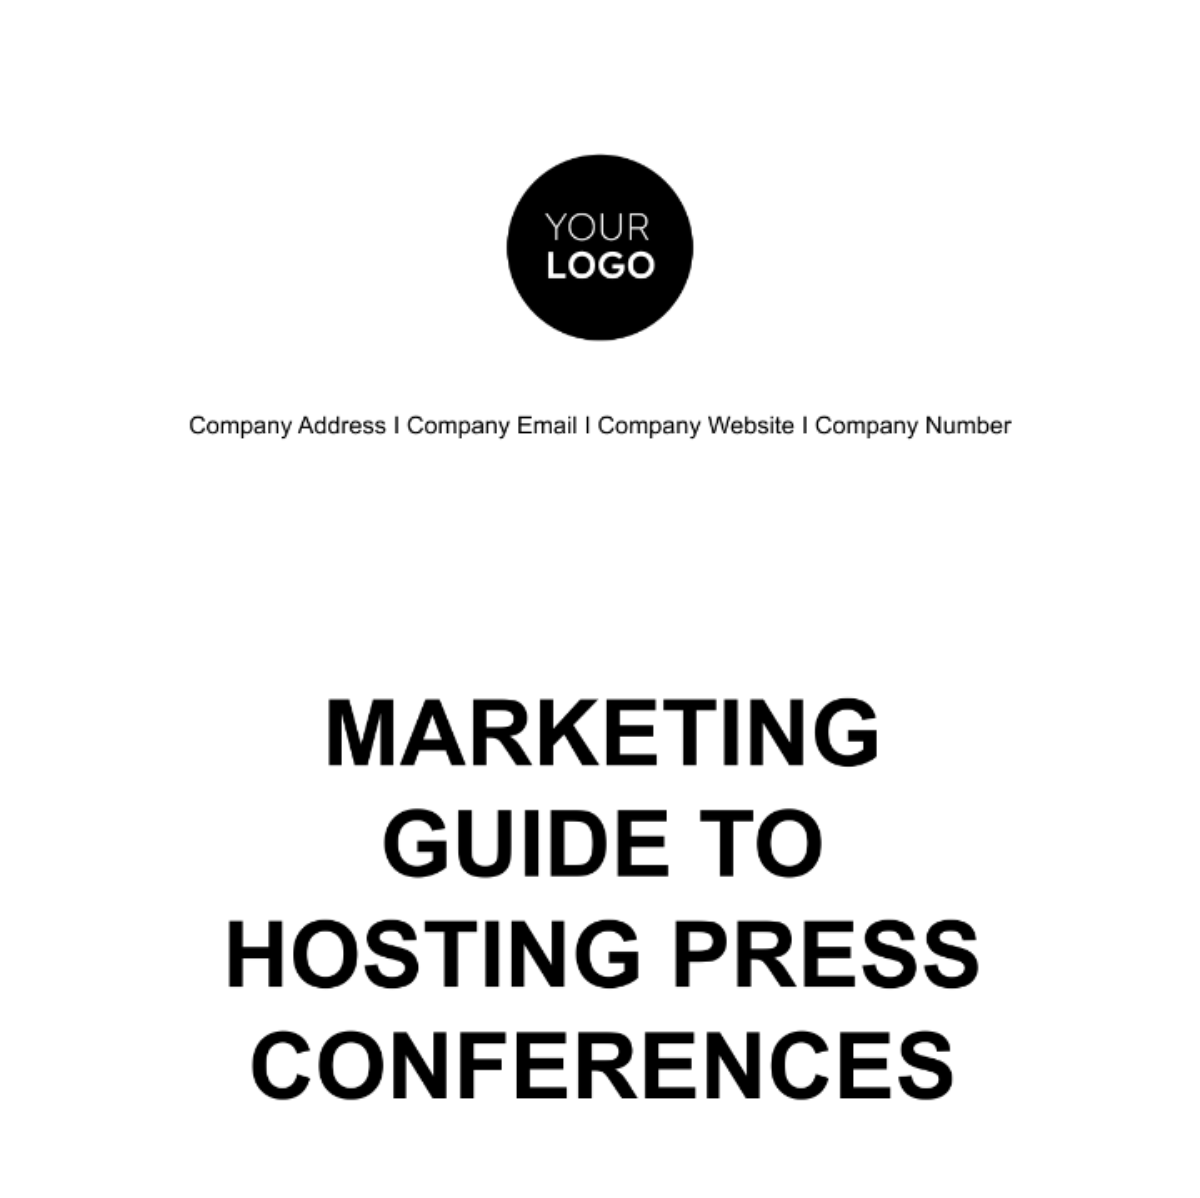 Marketing Guide to Hosting Press Conferences Template